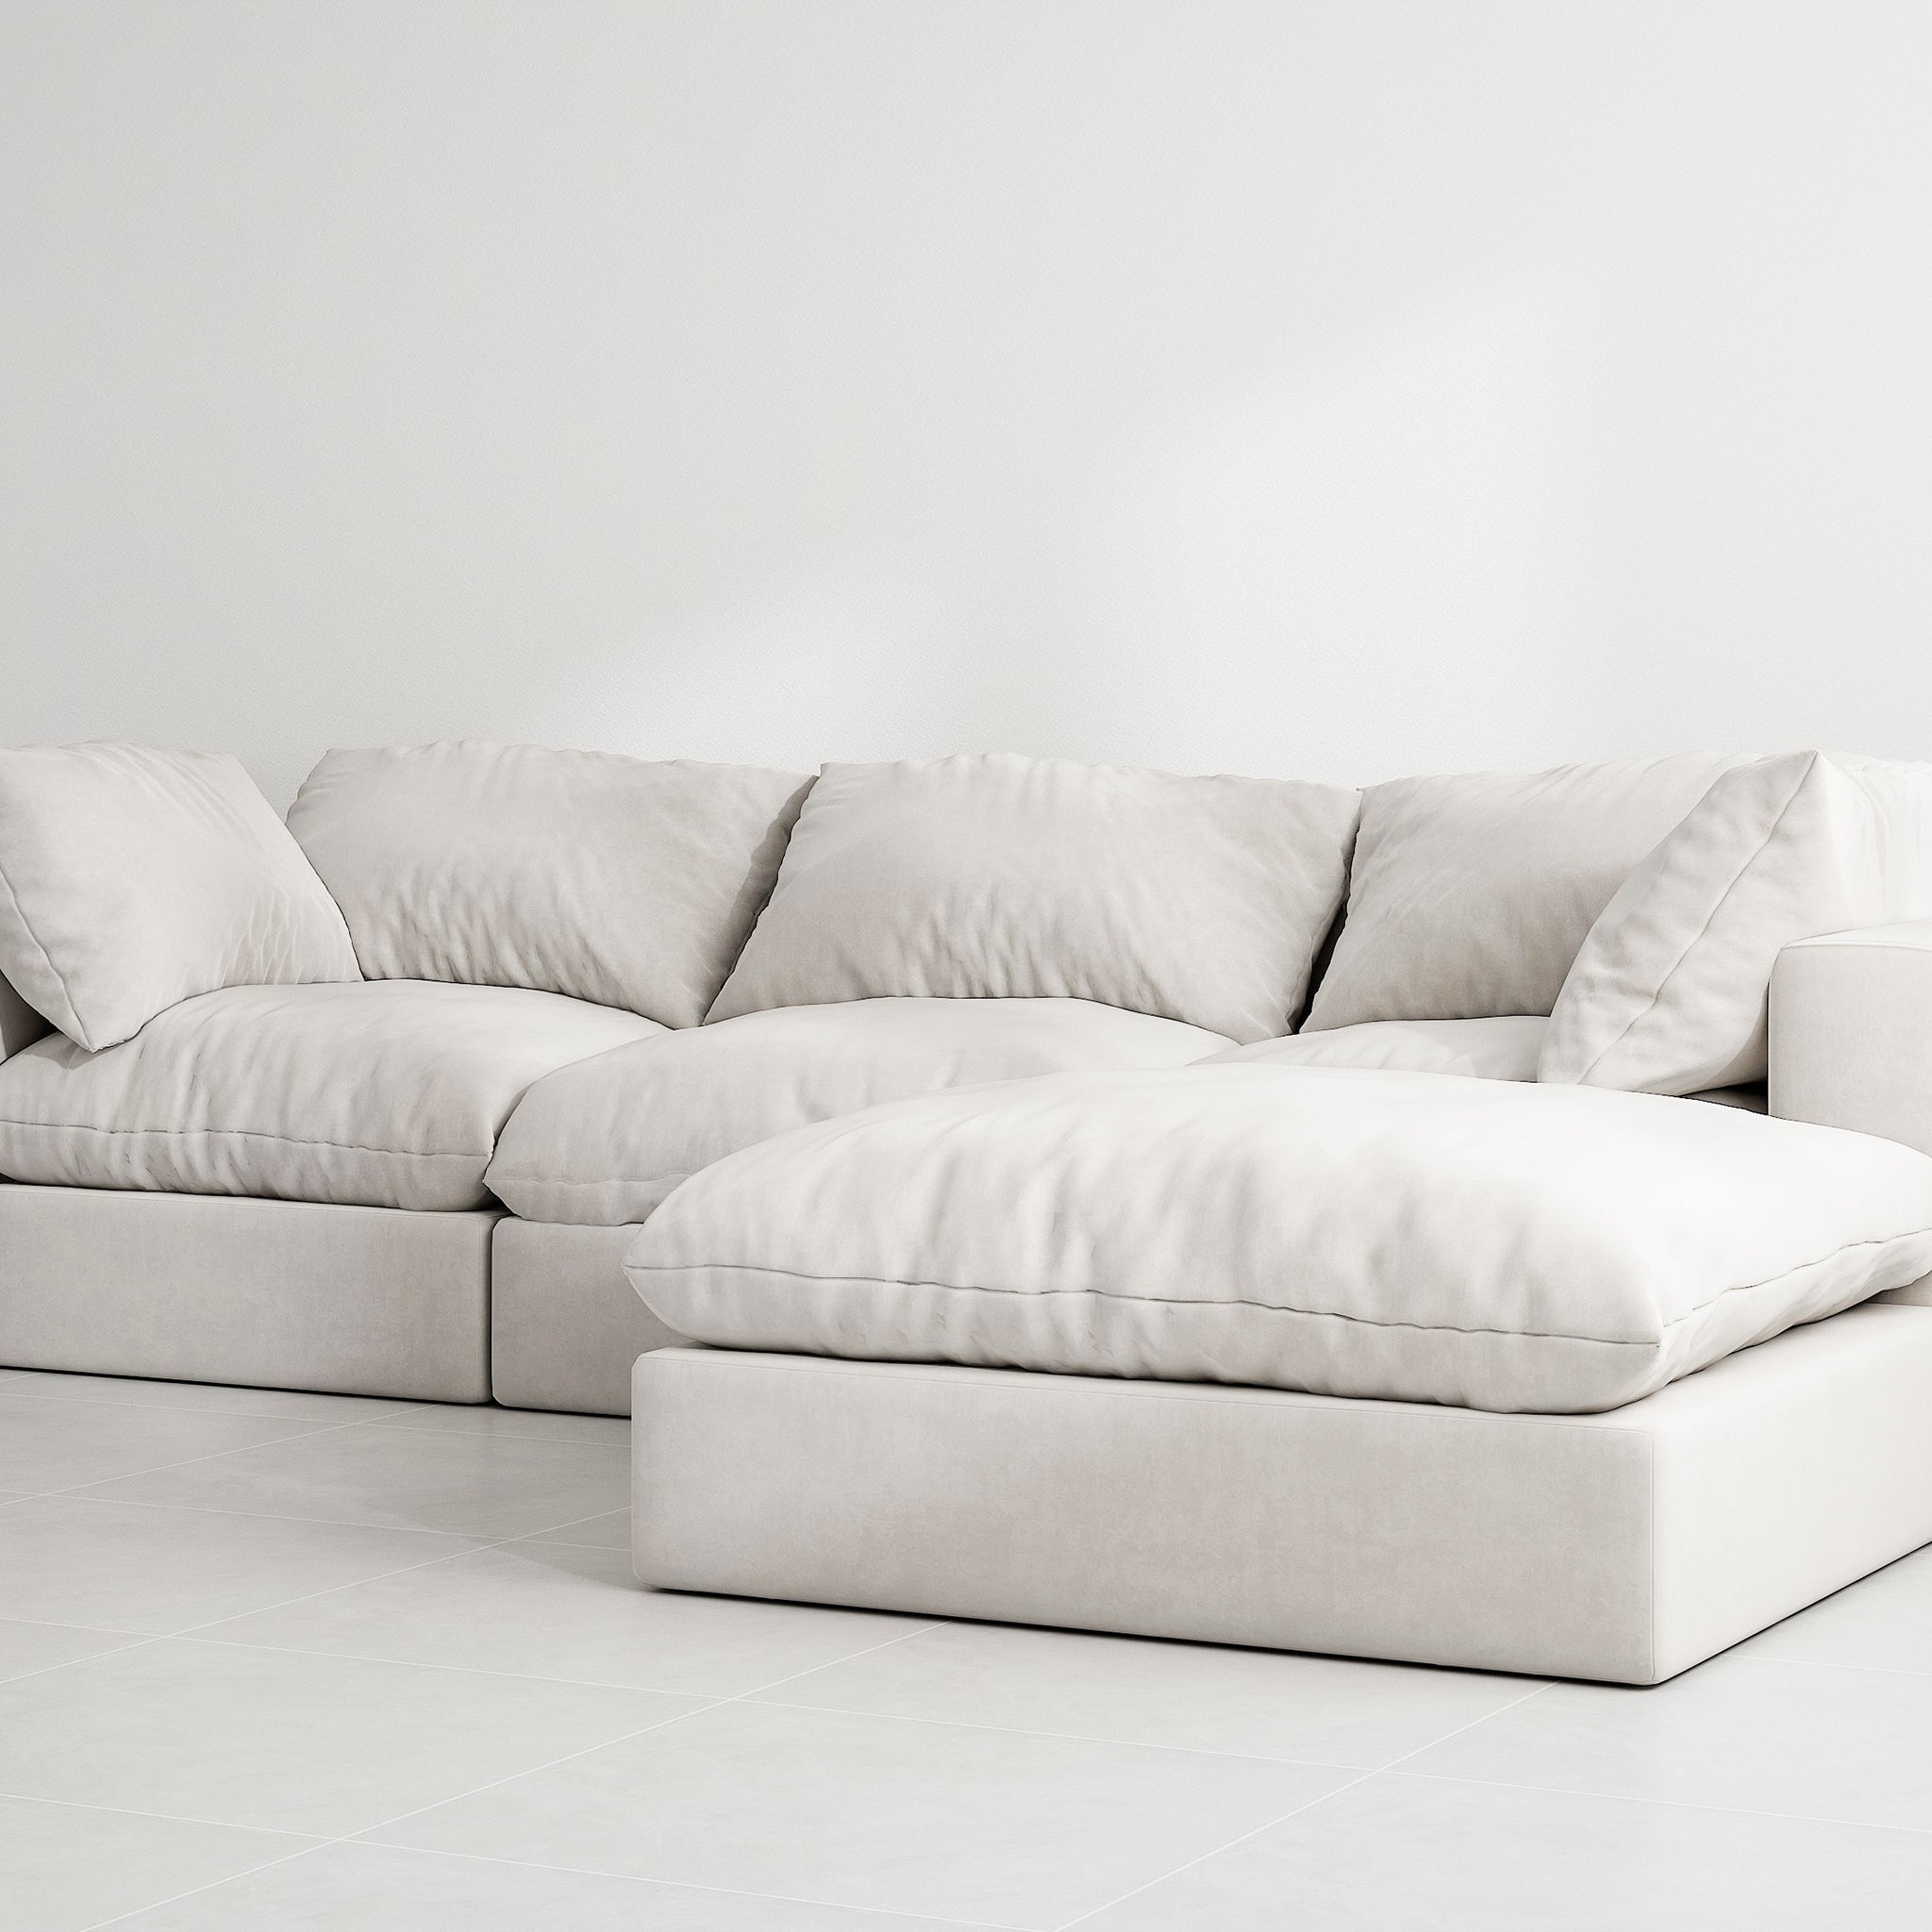 White sectional couch with detachable ottoman in a modern living room. The couch has soft cushions and a solid wood frame.